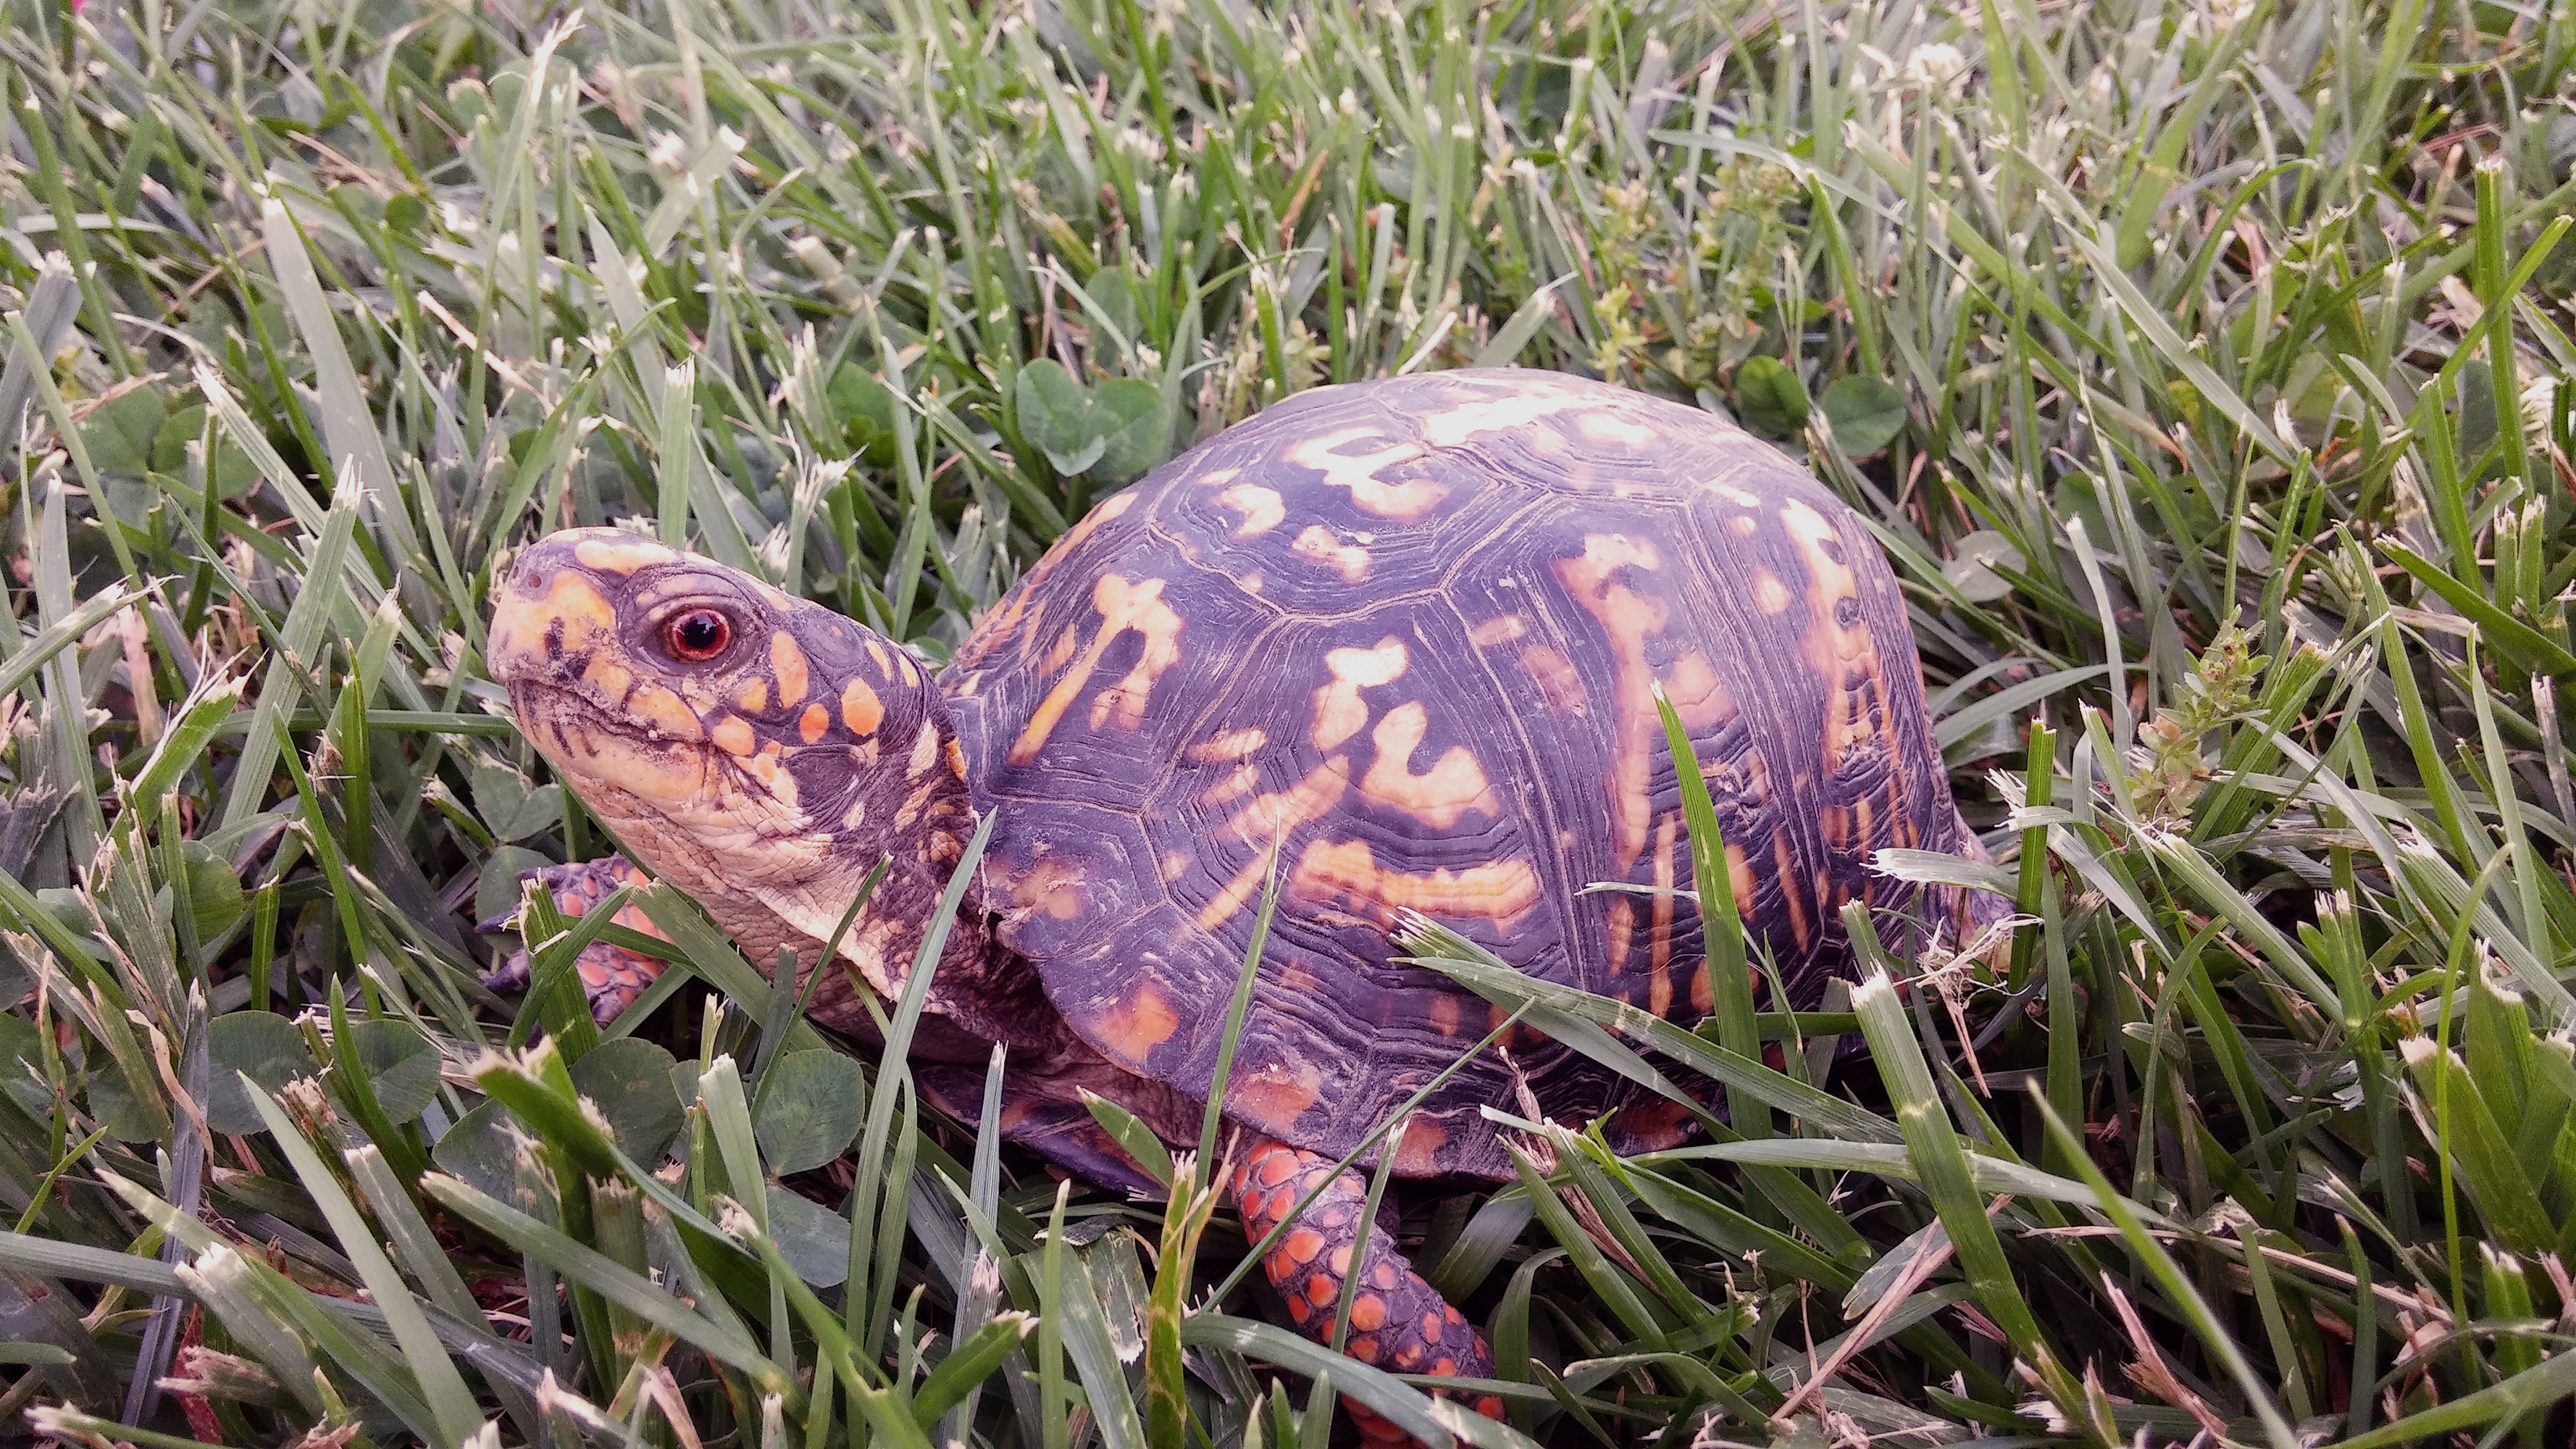 animals, grass, reptile, carapace, shell, turtle